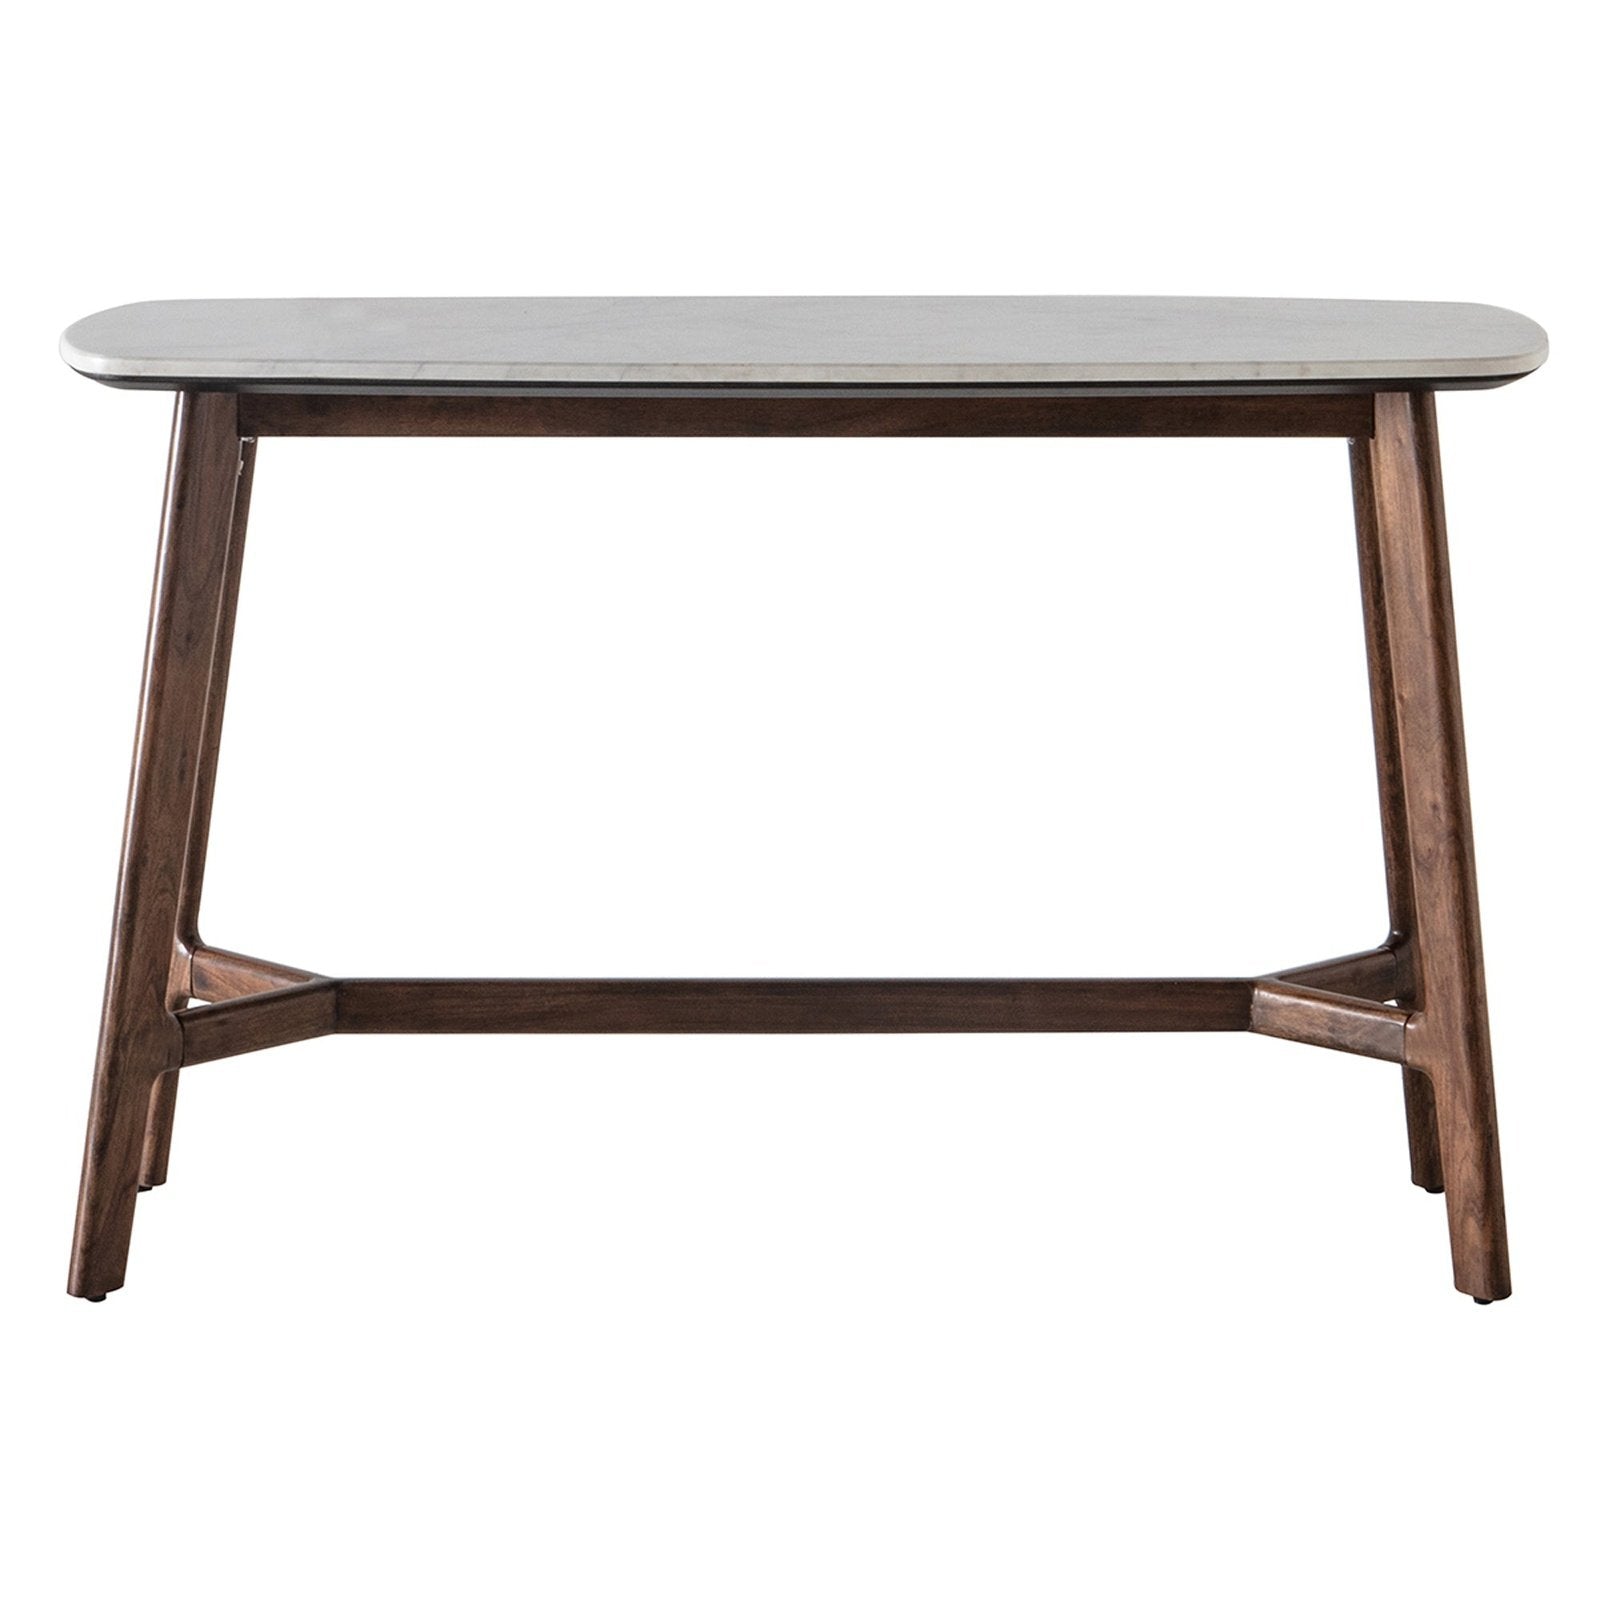 Cabrera Console Table - White Marble Top - Acacia Wood Legs